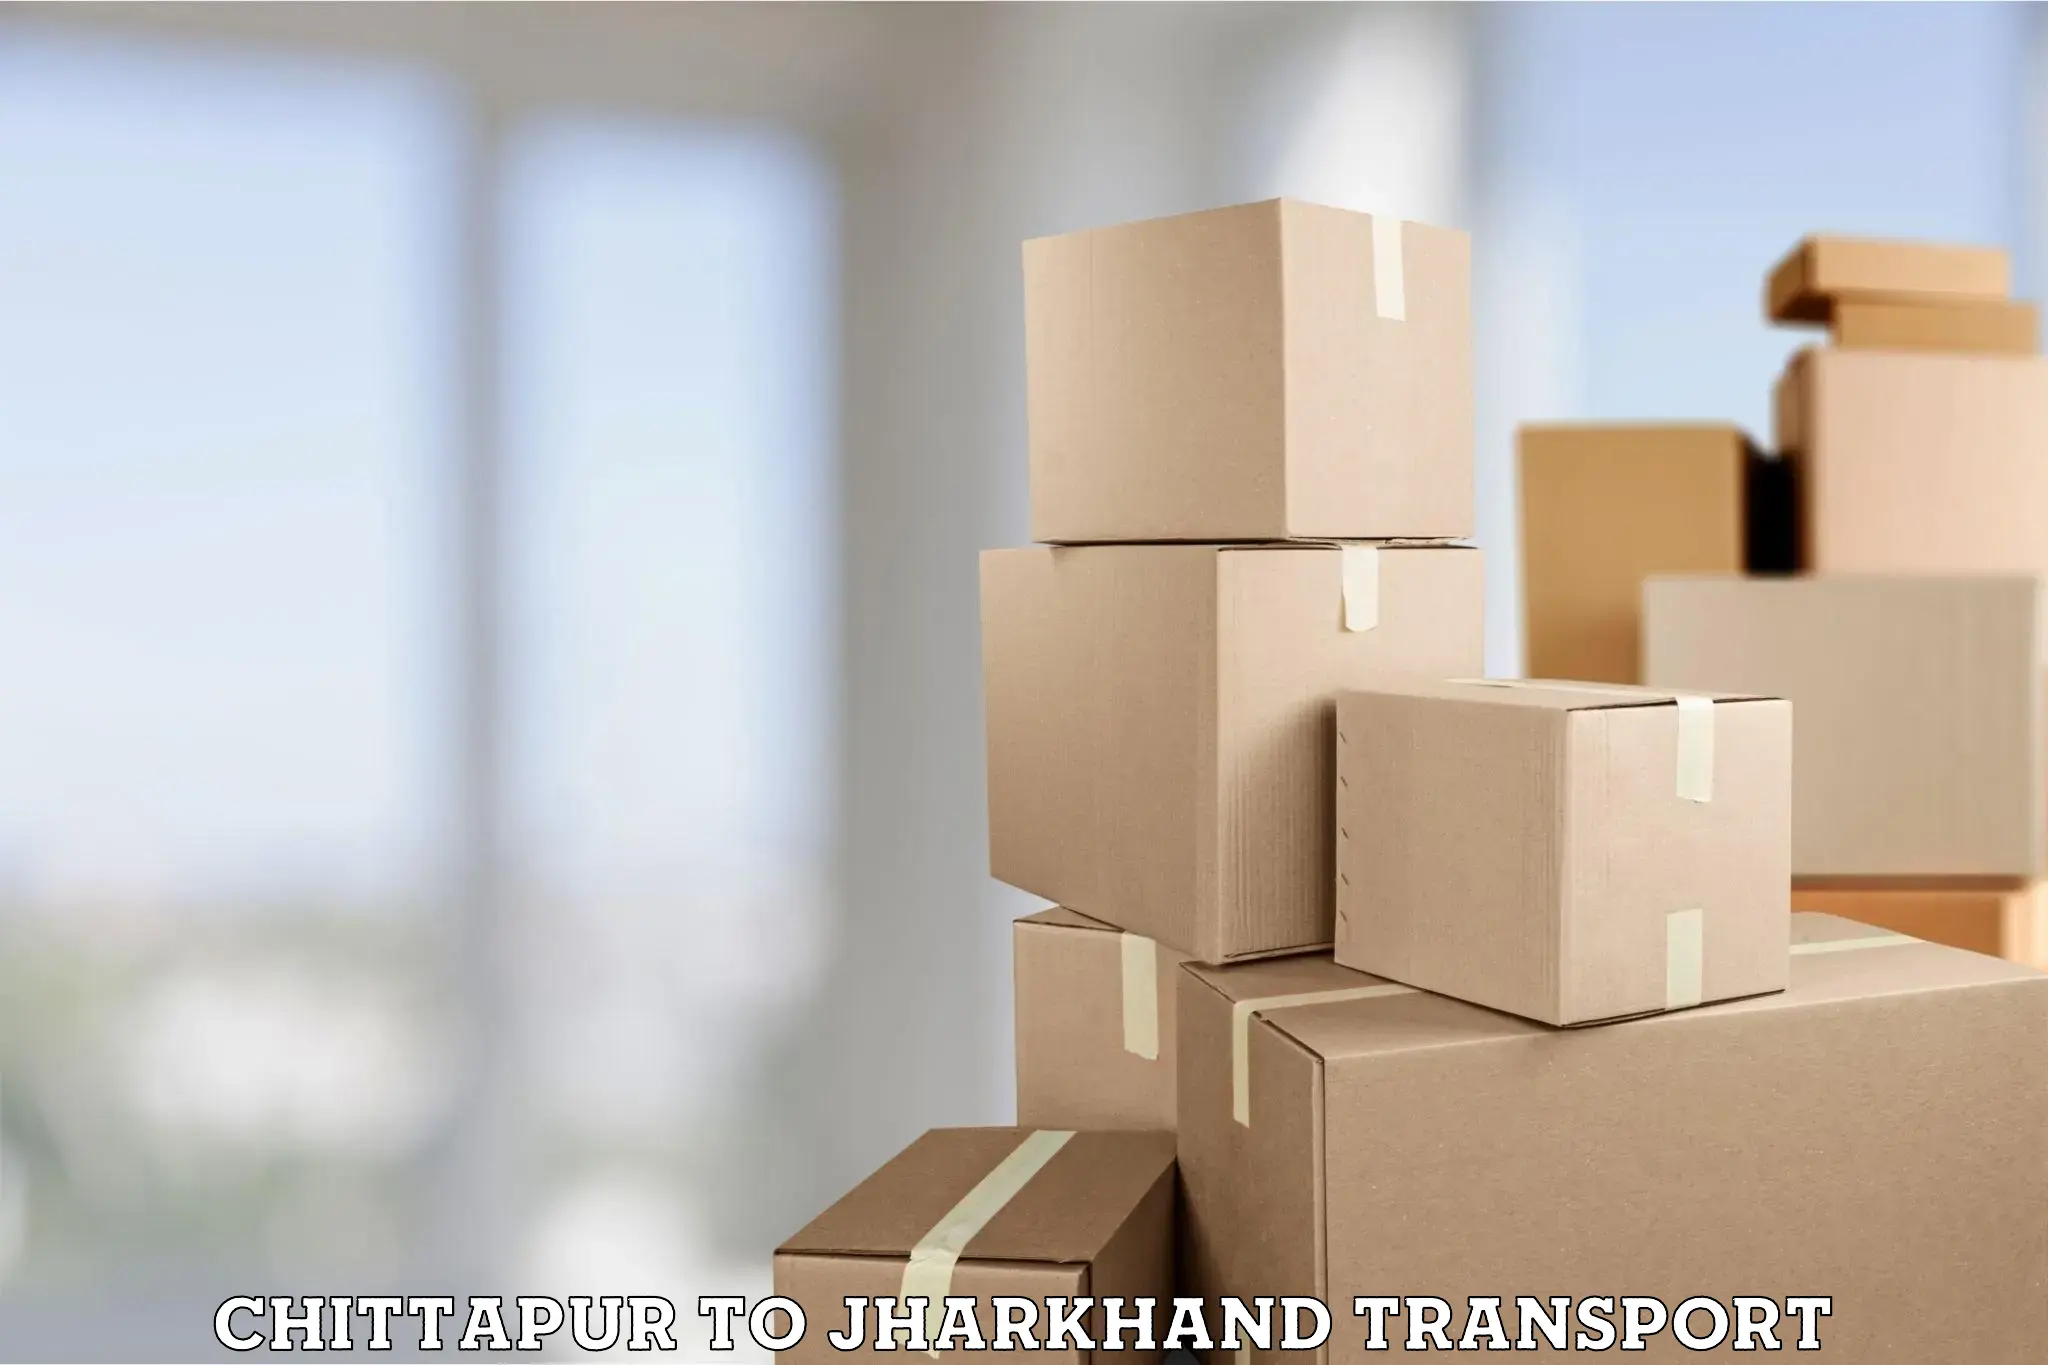 Daily parcel service transport Chittapur to Jharkhand